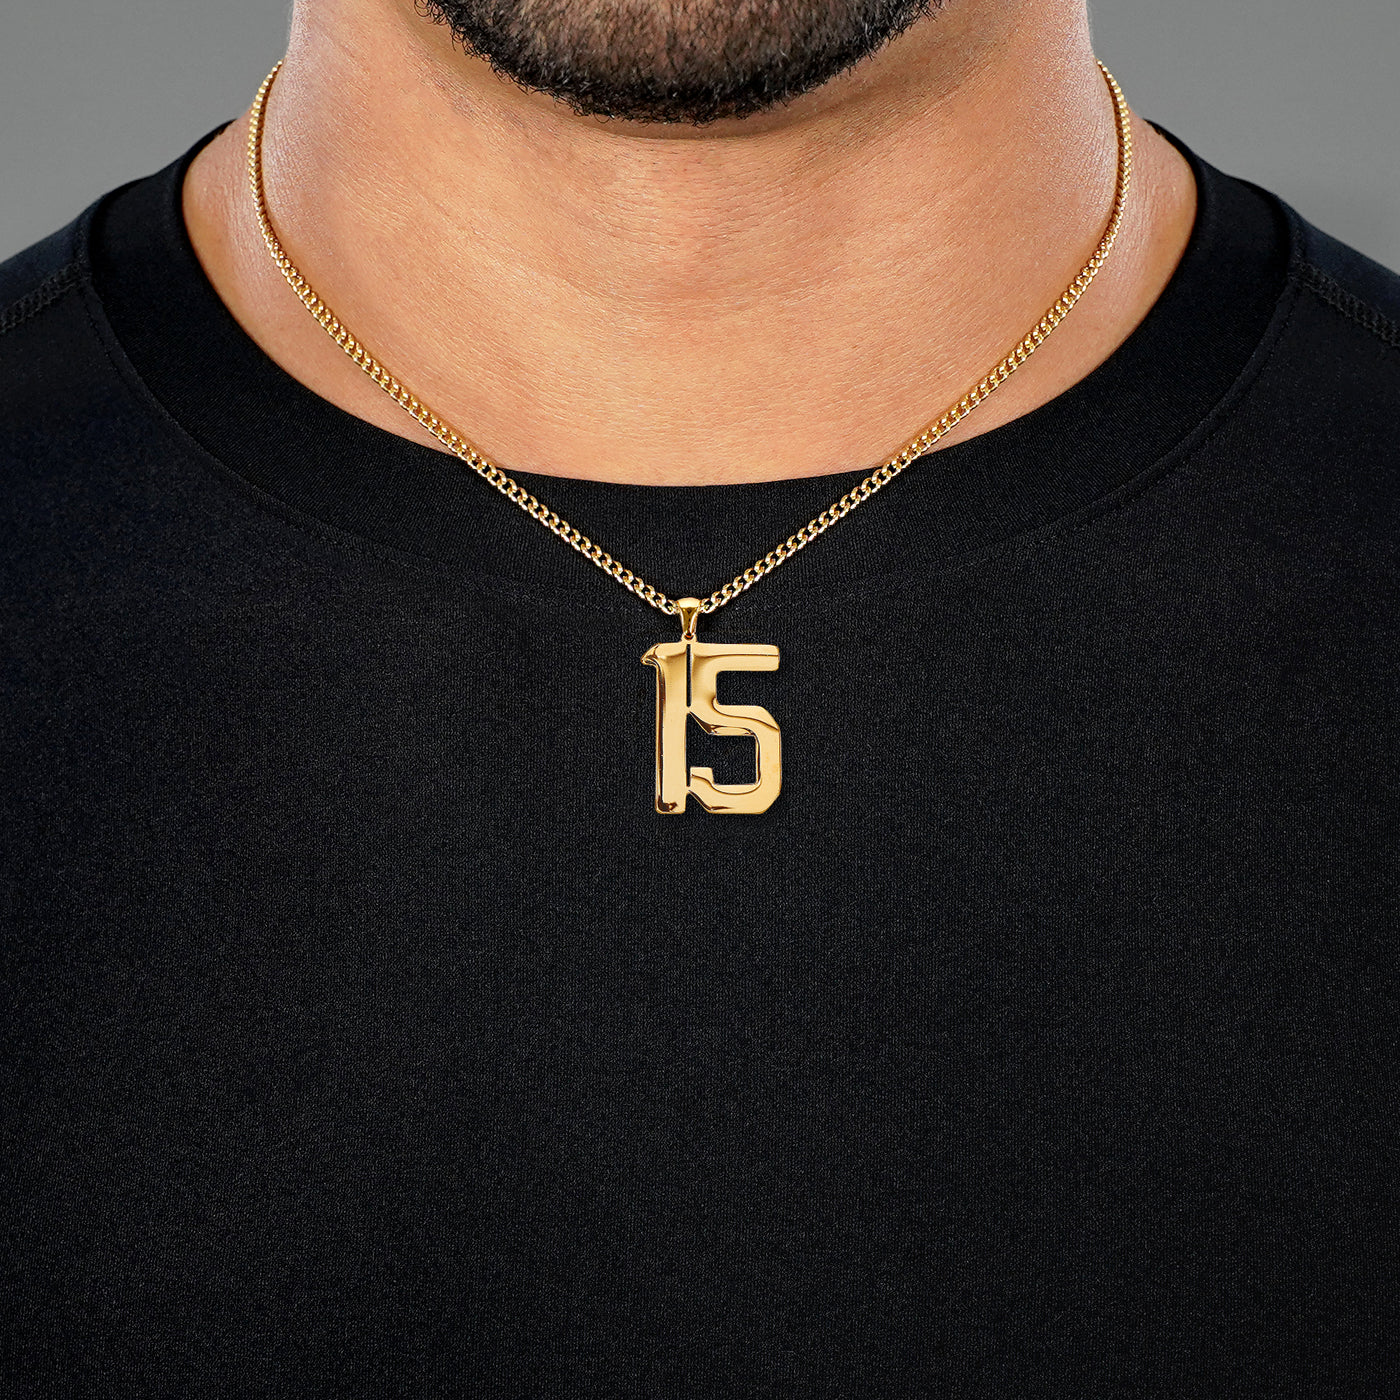 15 Number Pendant with Chain Necklace - Gold Plated Stainless Steel